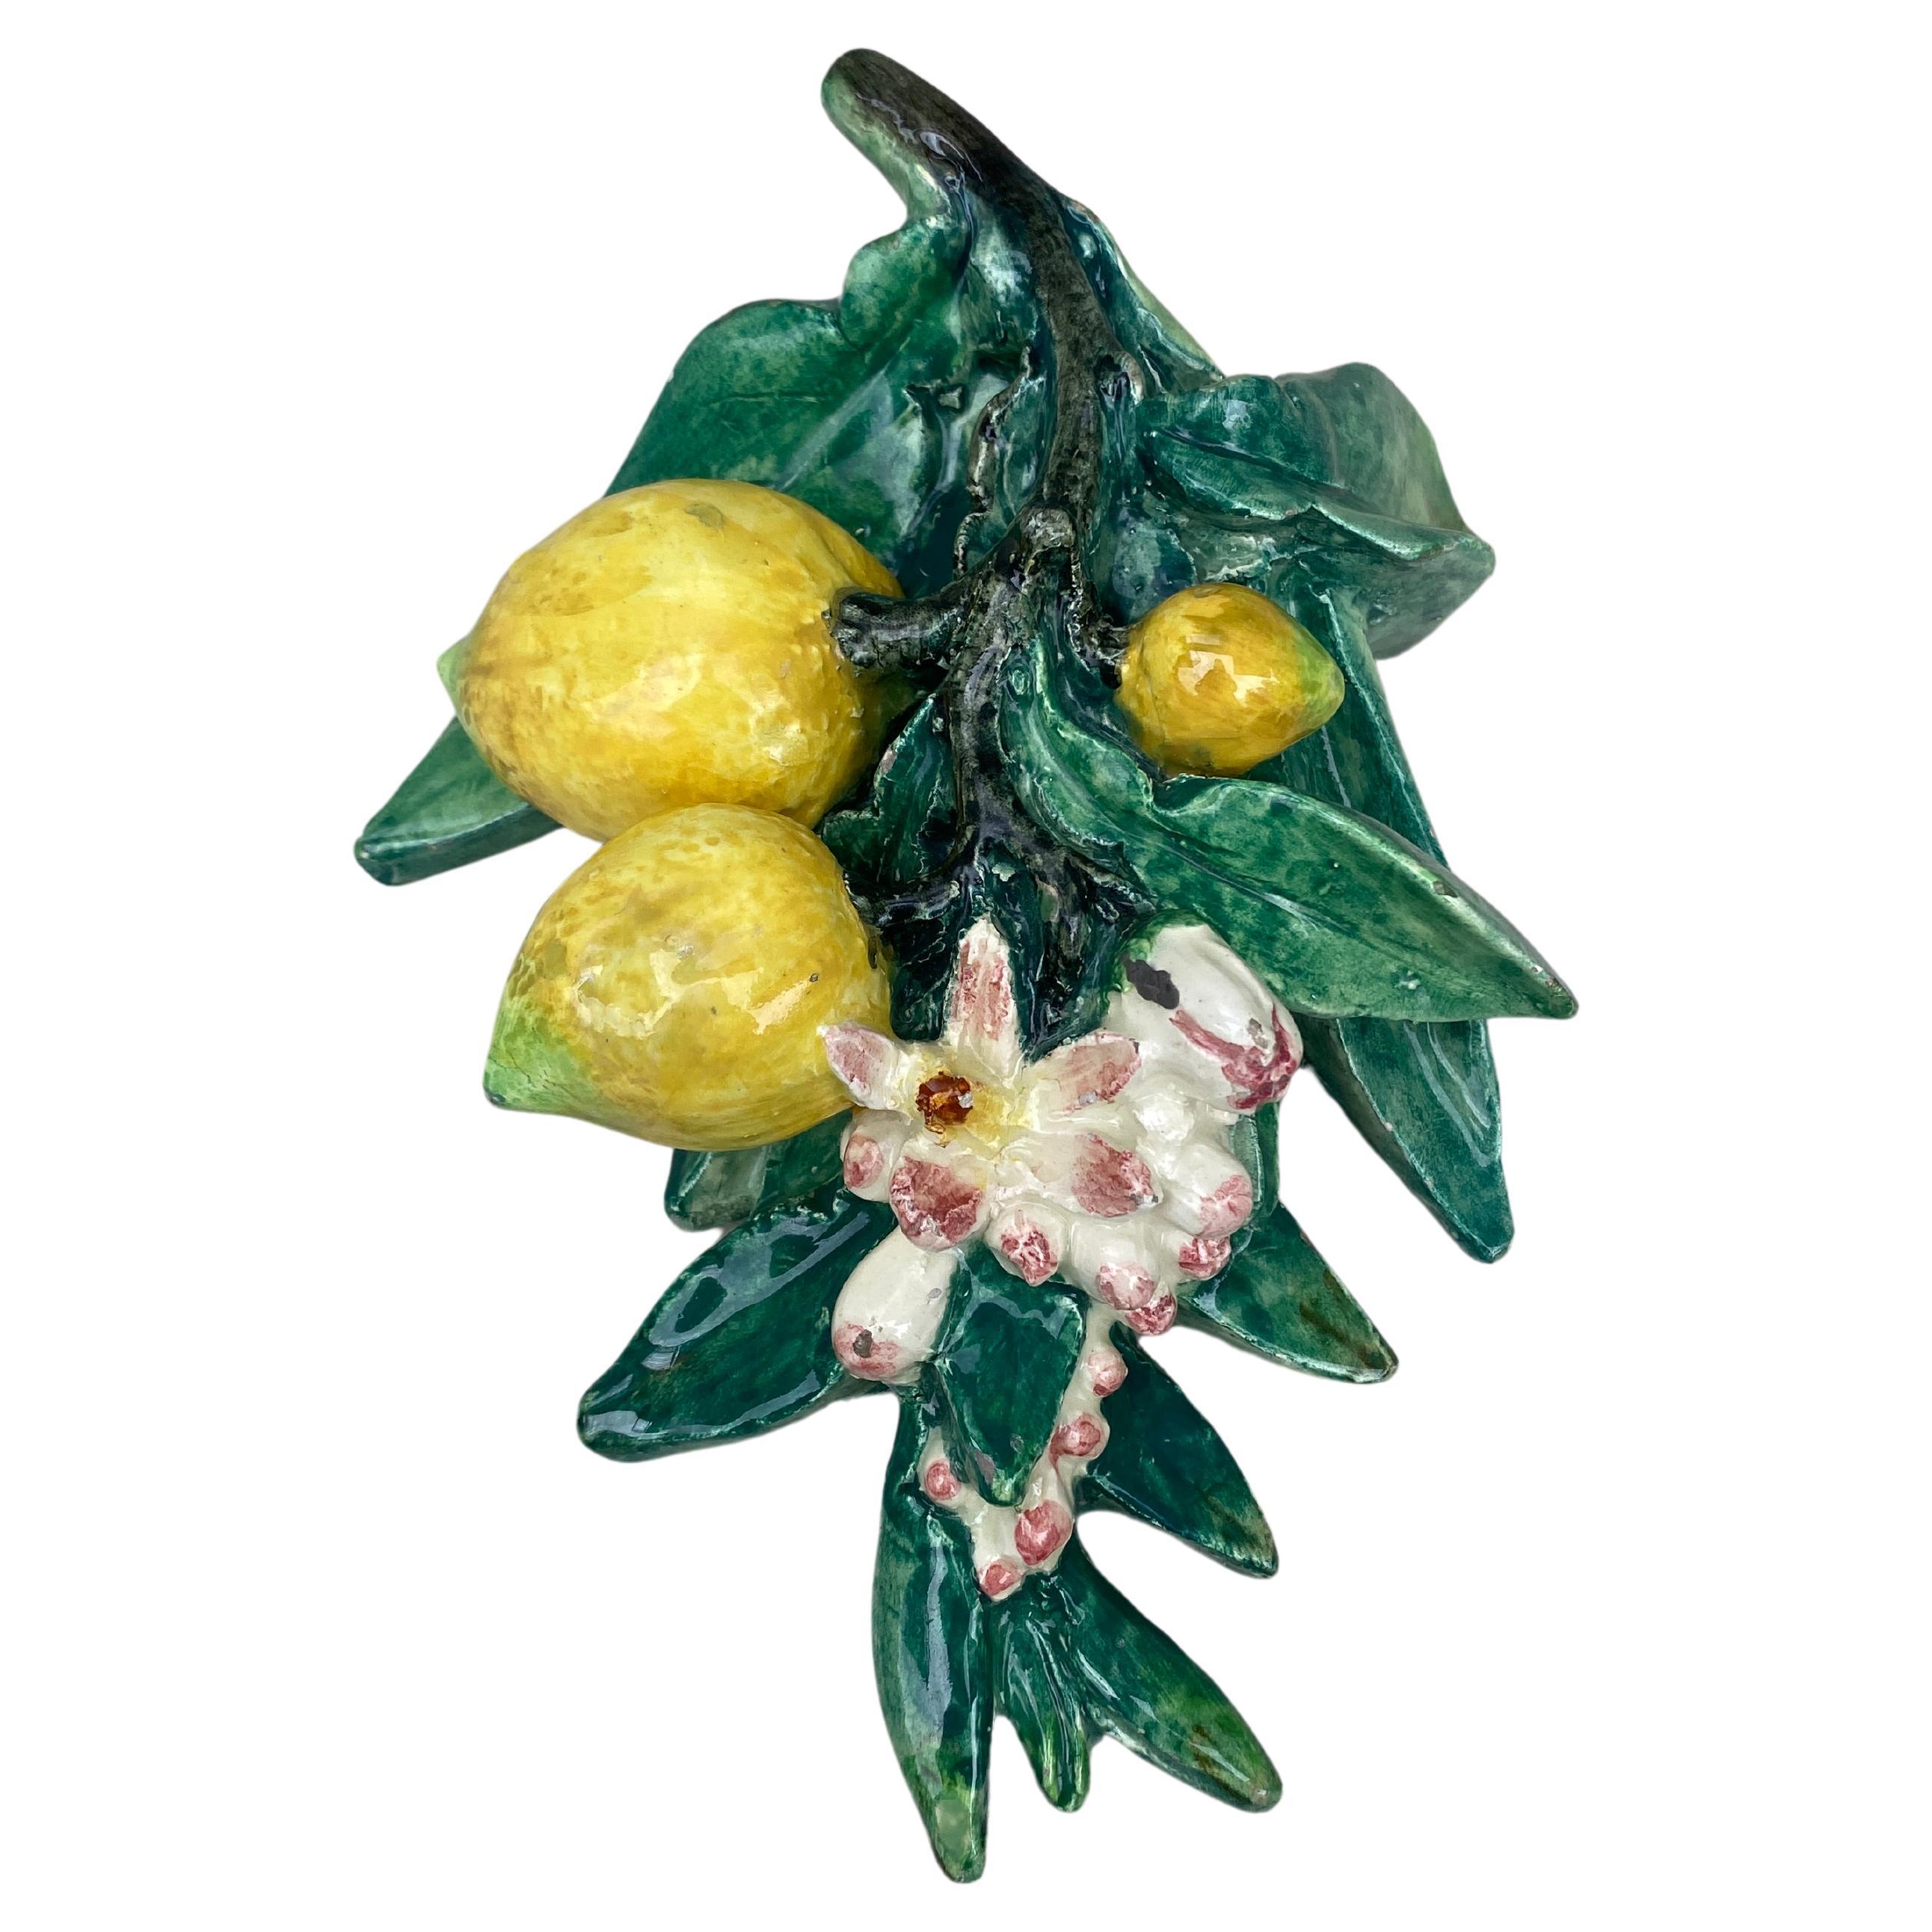 Rare Majolica lemons applique signed Delphin Massier, circa 1890.
The Massier family produced several examples of wall decorations as animals, flowers more rarely fruits.